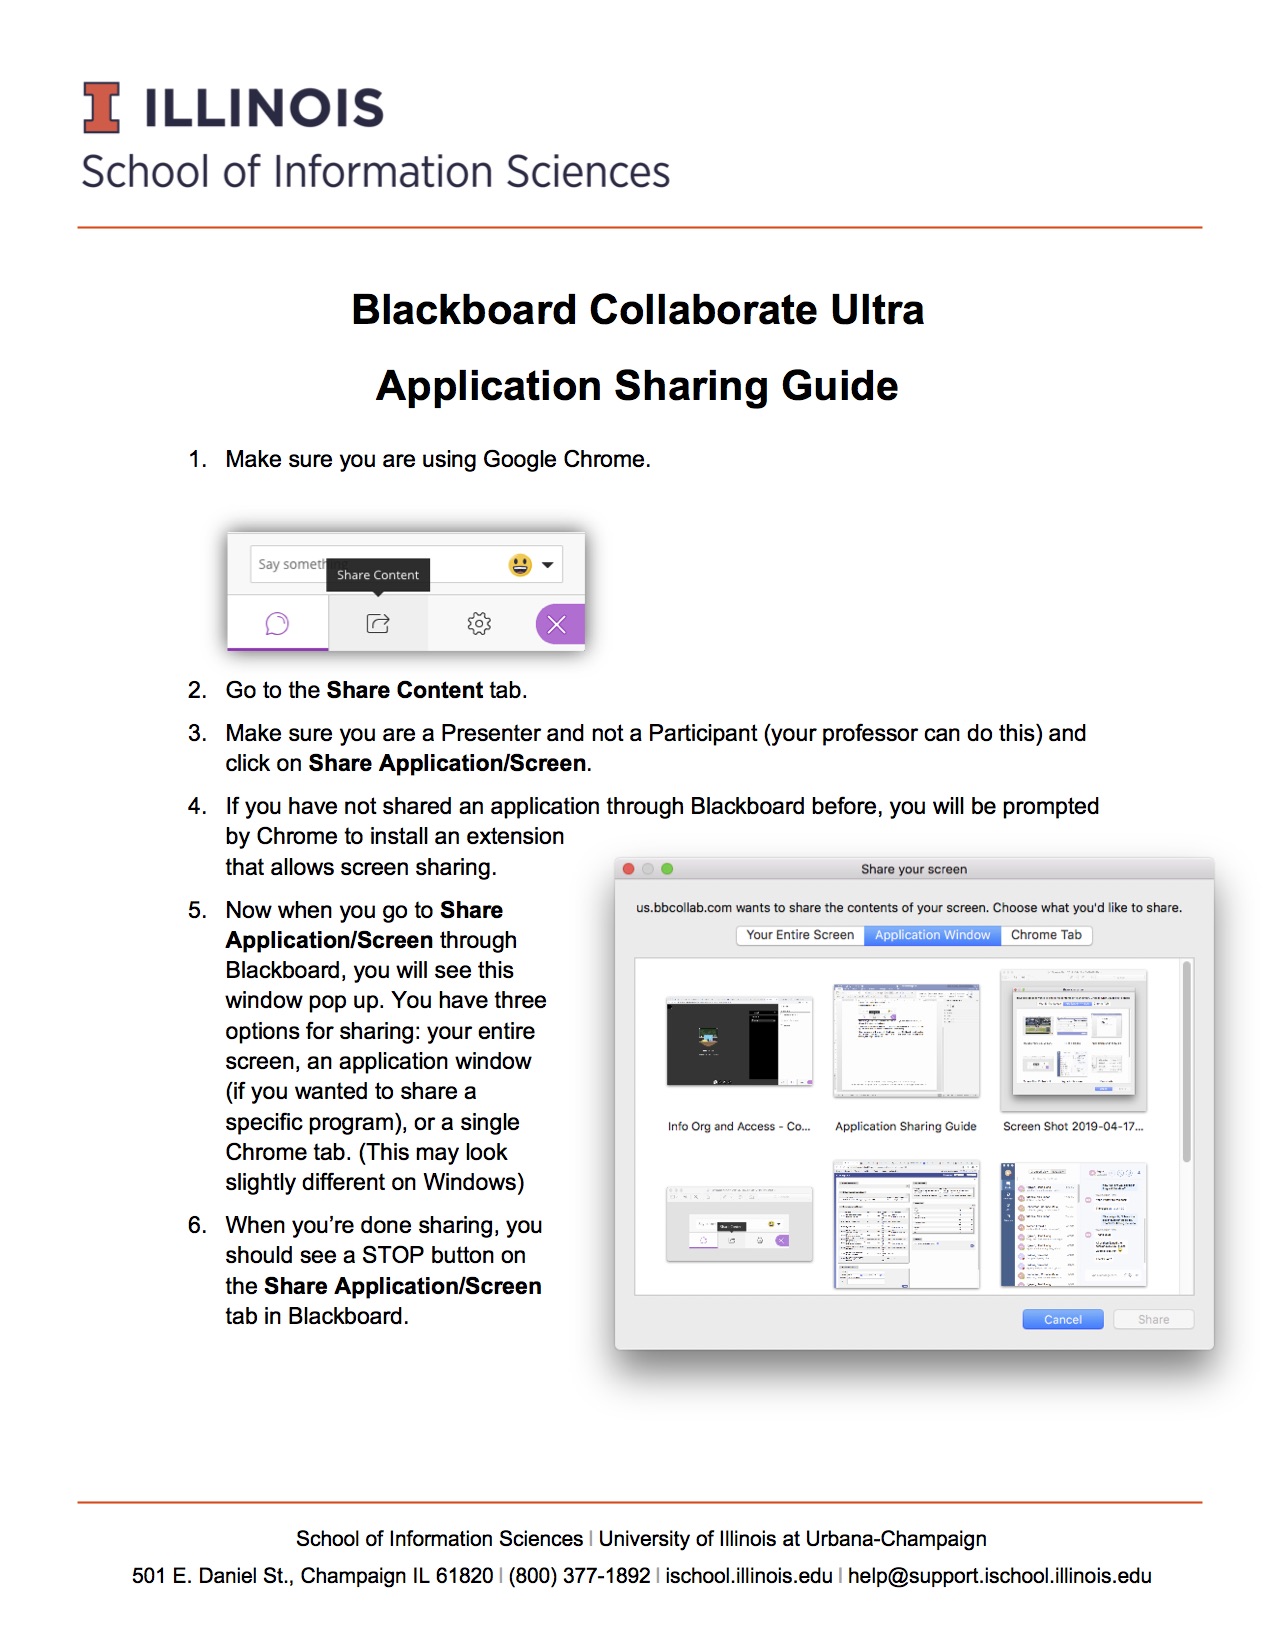 Blackboard Collaborate Ultra Application Sharing Guide: Use BBC on Chrome, go to the share Content tab, click on share application/screen, then select which application to share. 